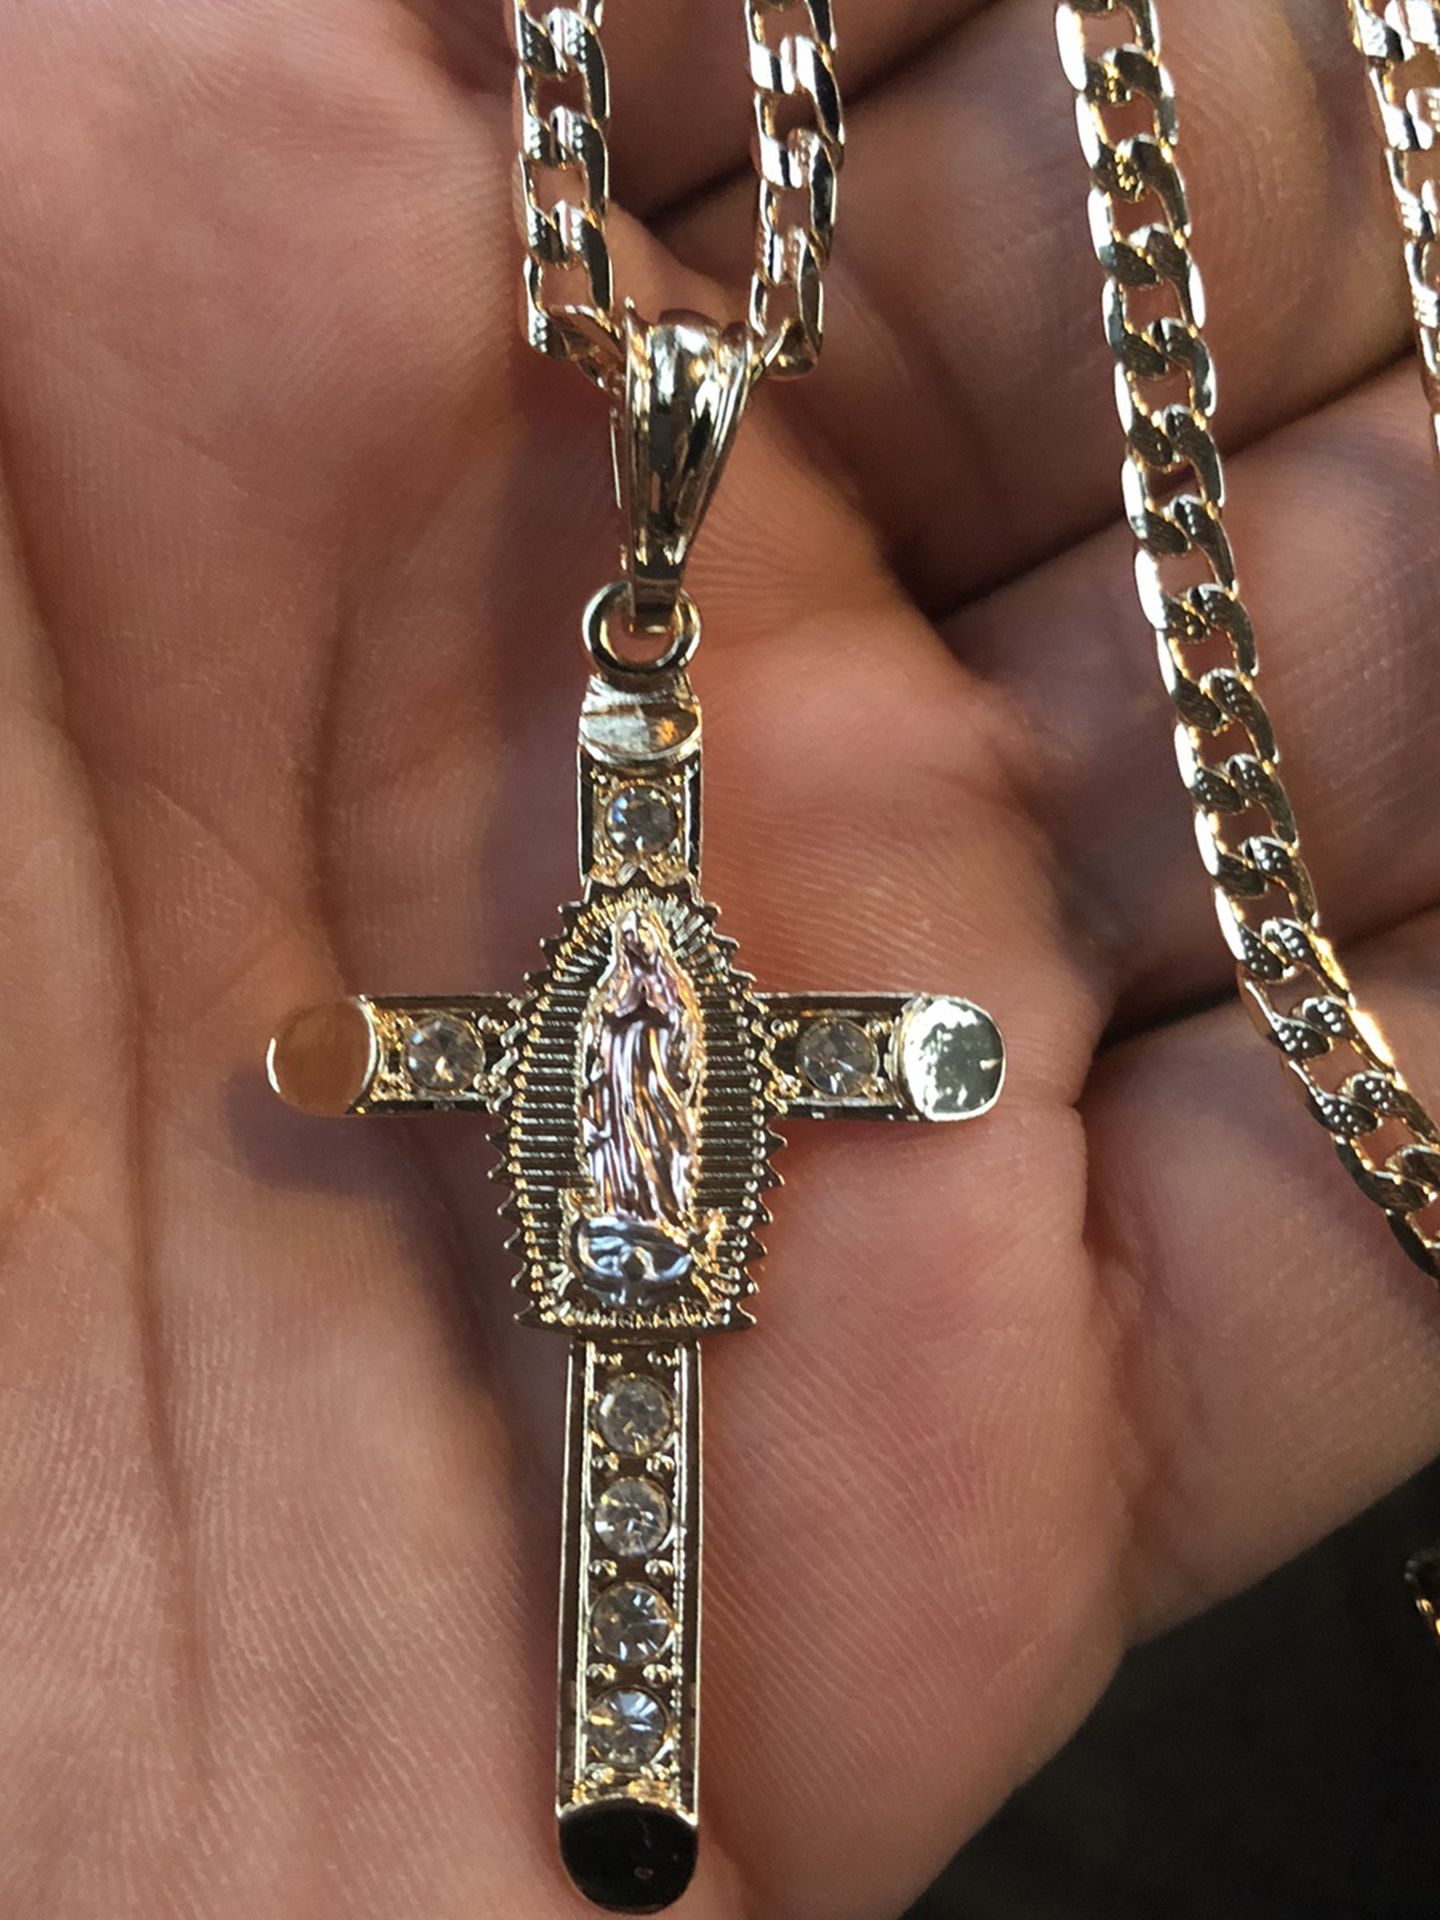 14kmgl(gold-filled not plated or stainless ) Mqry Cross pendant & 4mm 22” Inch Curb cuban link chain , includes warranty